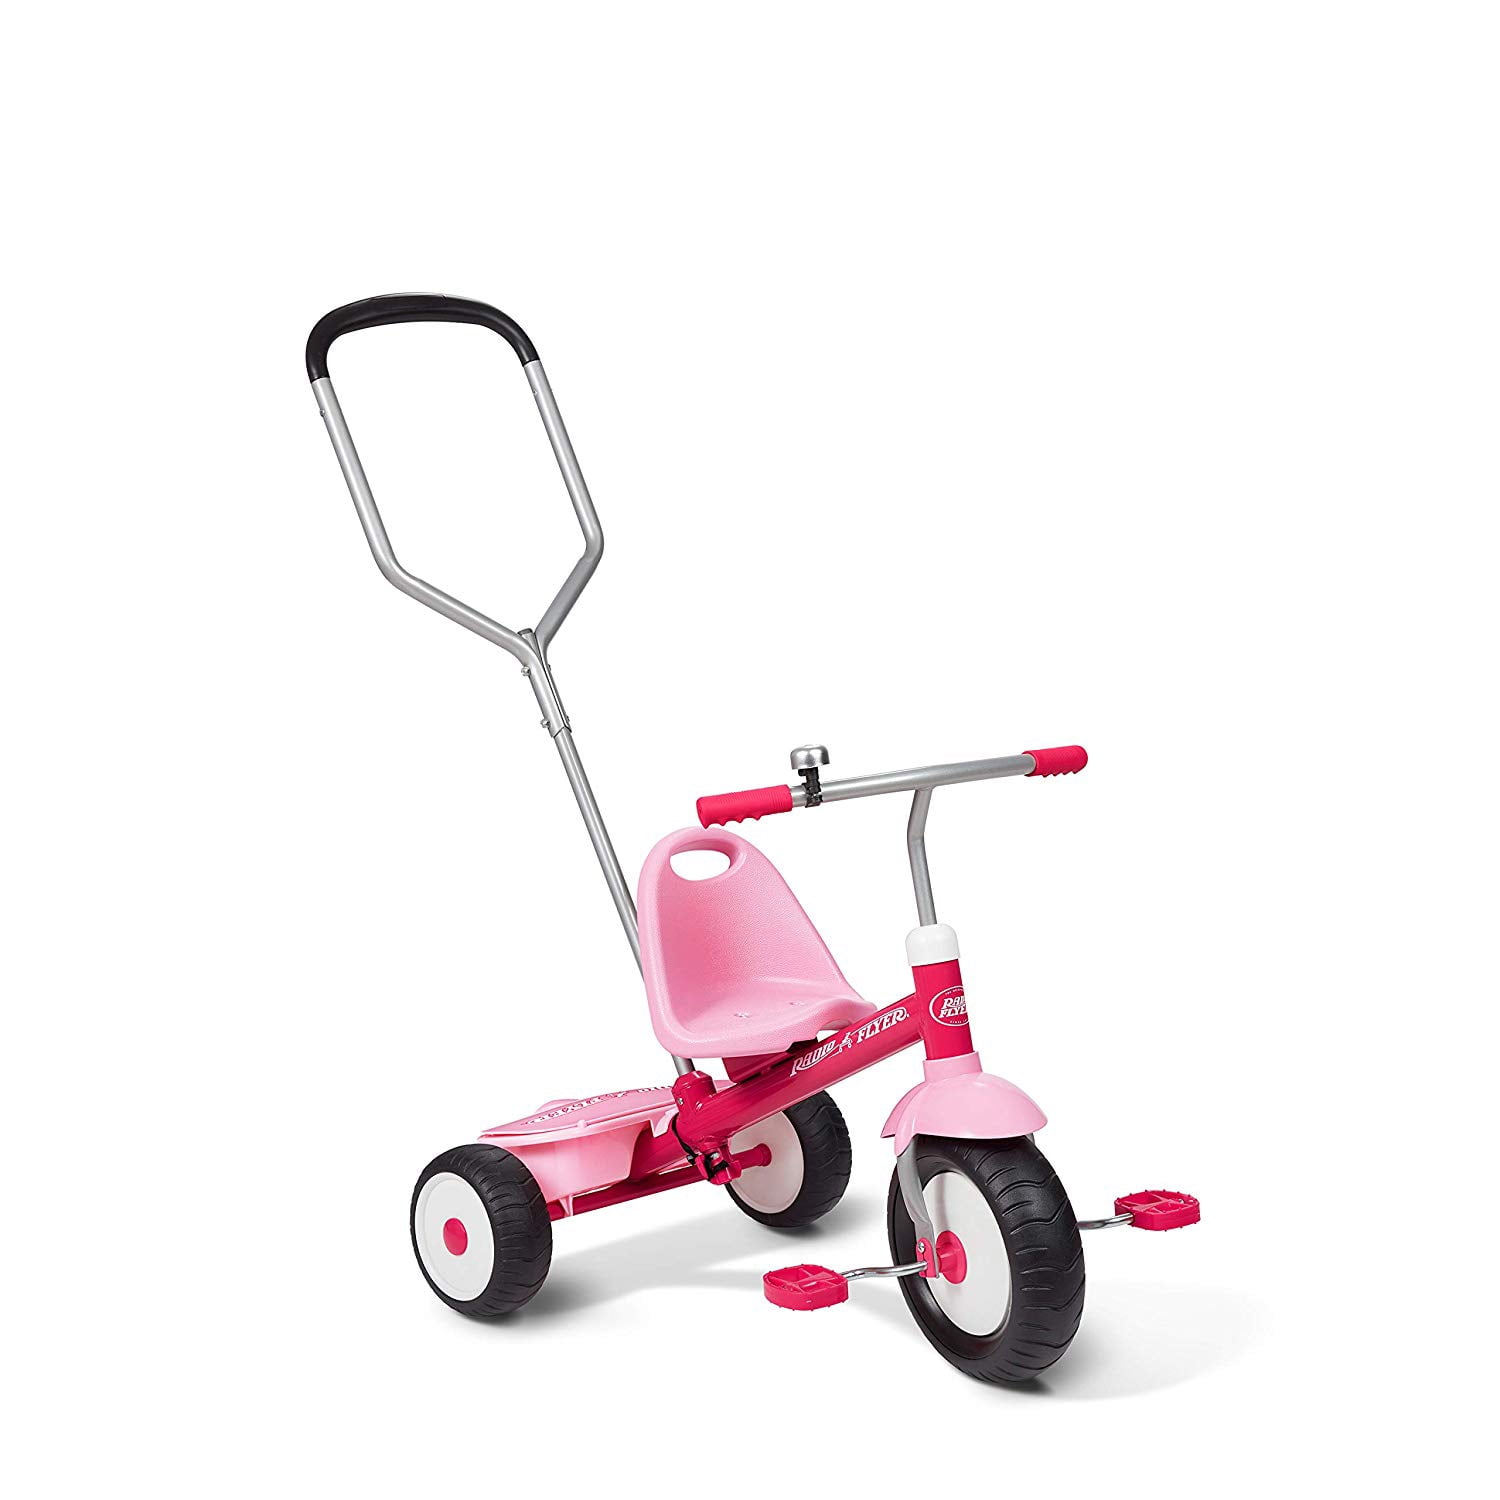 Red smarTrike 195 0500   Voyage 4-in-1 Tricycle for Children from 10 Months 